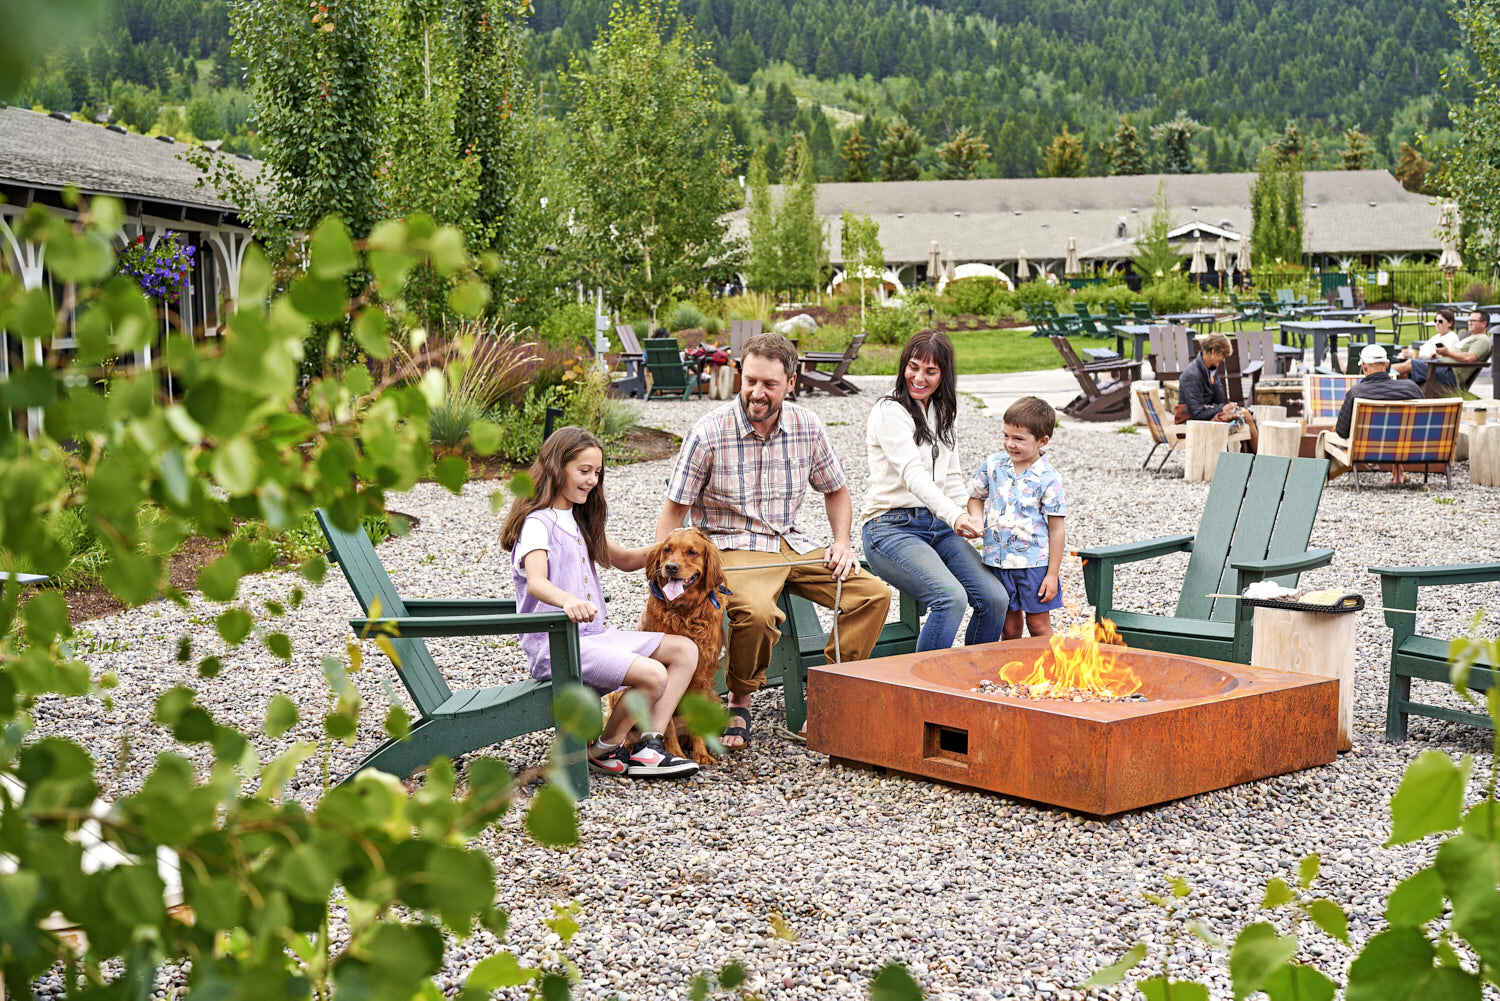 Family relishing memorable moments by the bonfire, surrounded by a scenic view of green plants.